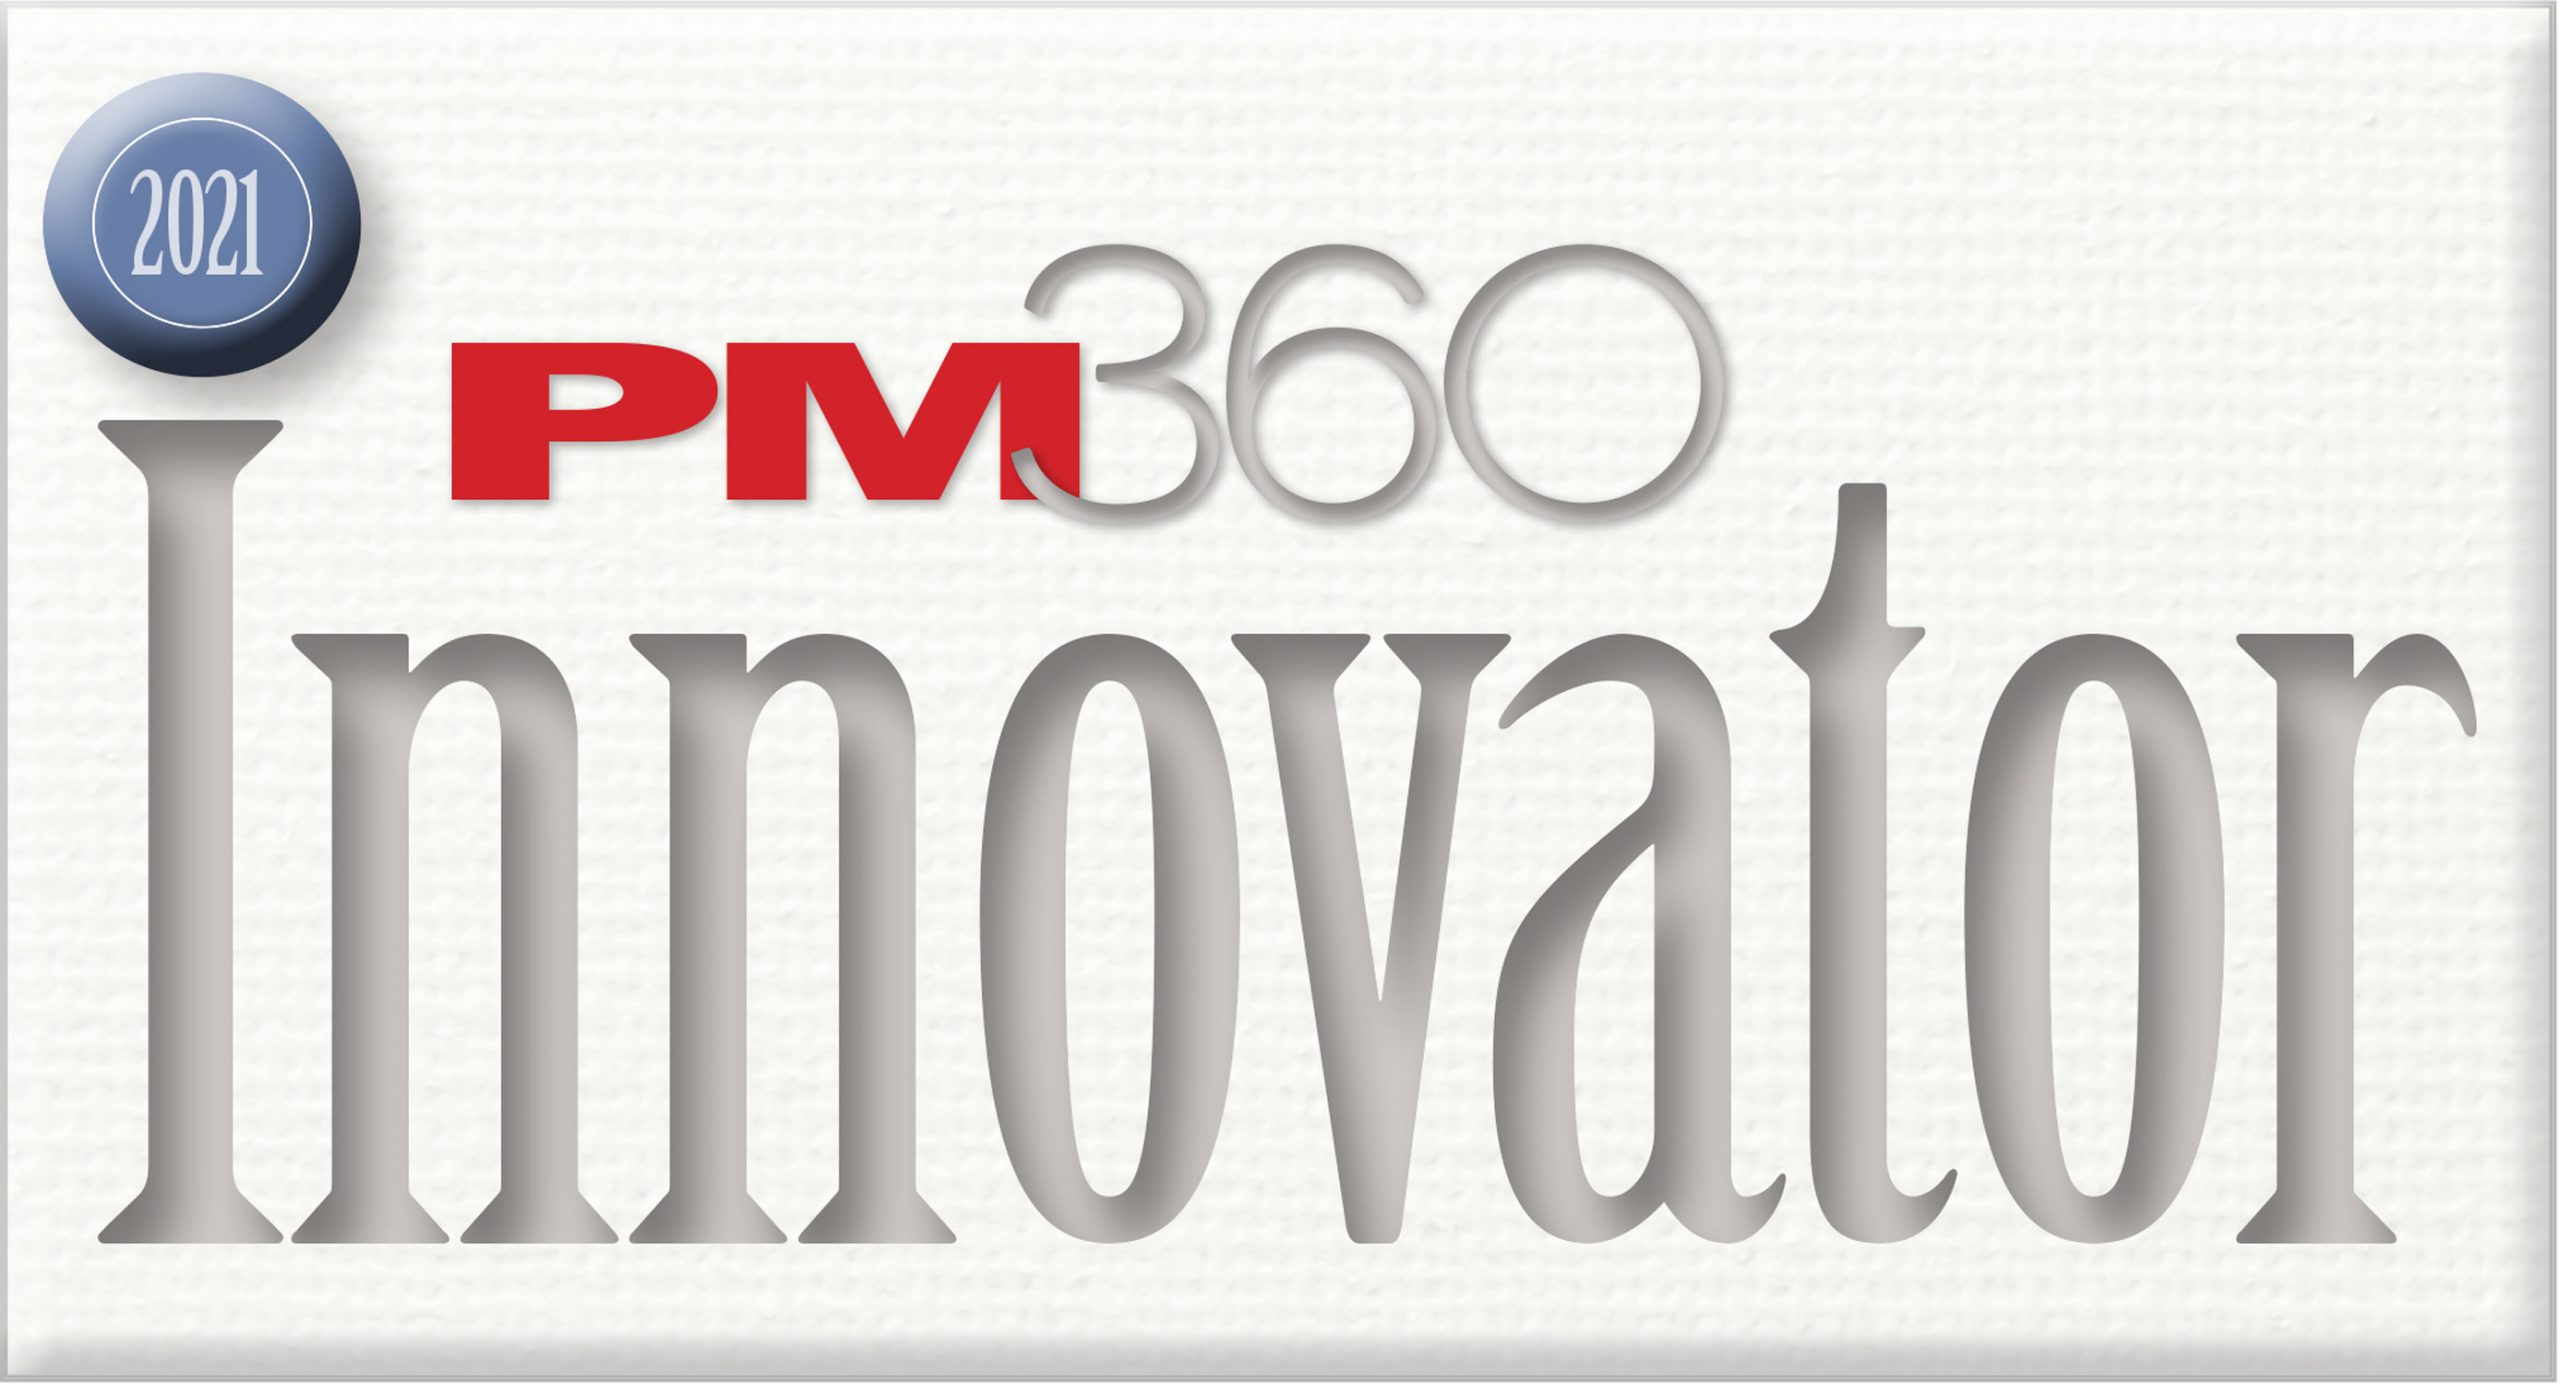 Kander™ Patient Feedback System Named One Of The Most Innovative Products Of 2021 By PM360